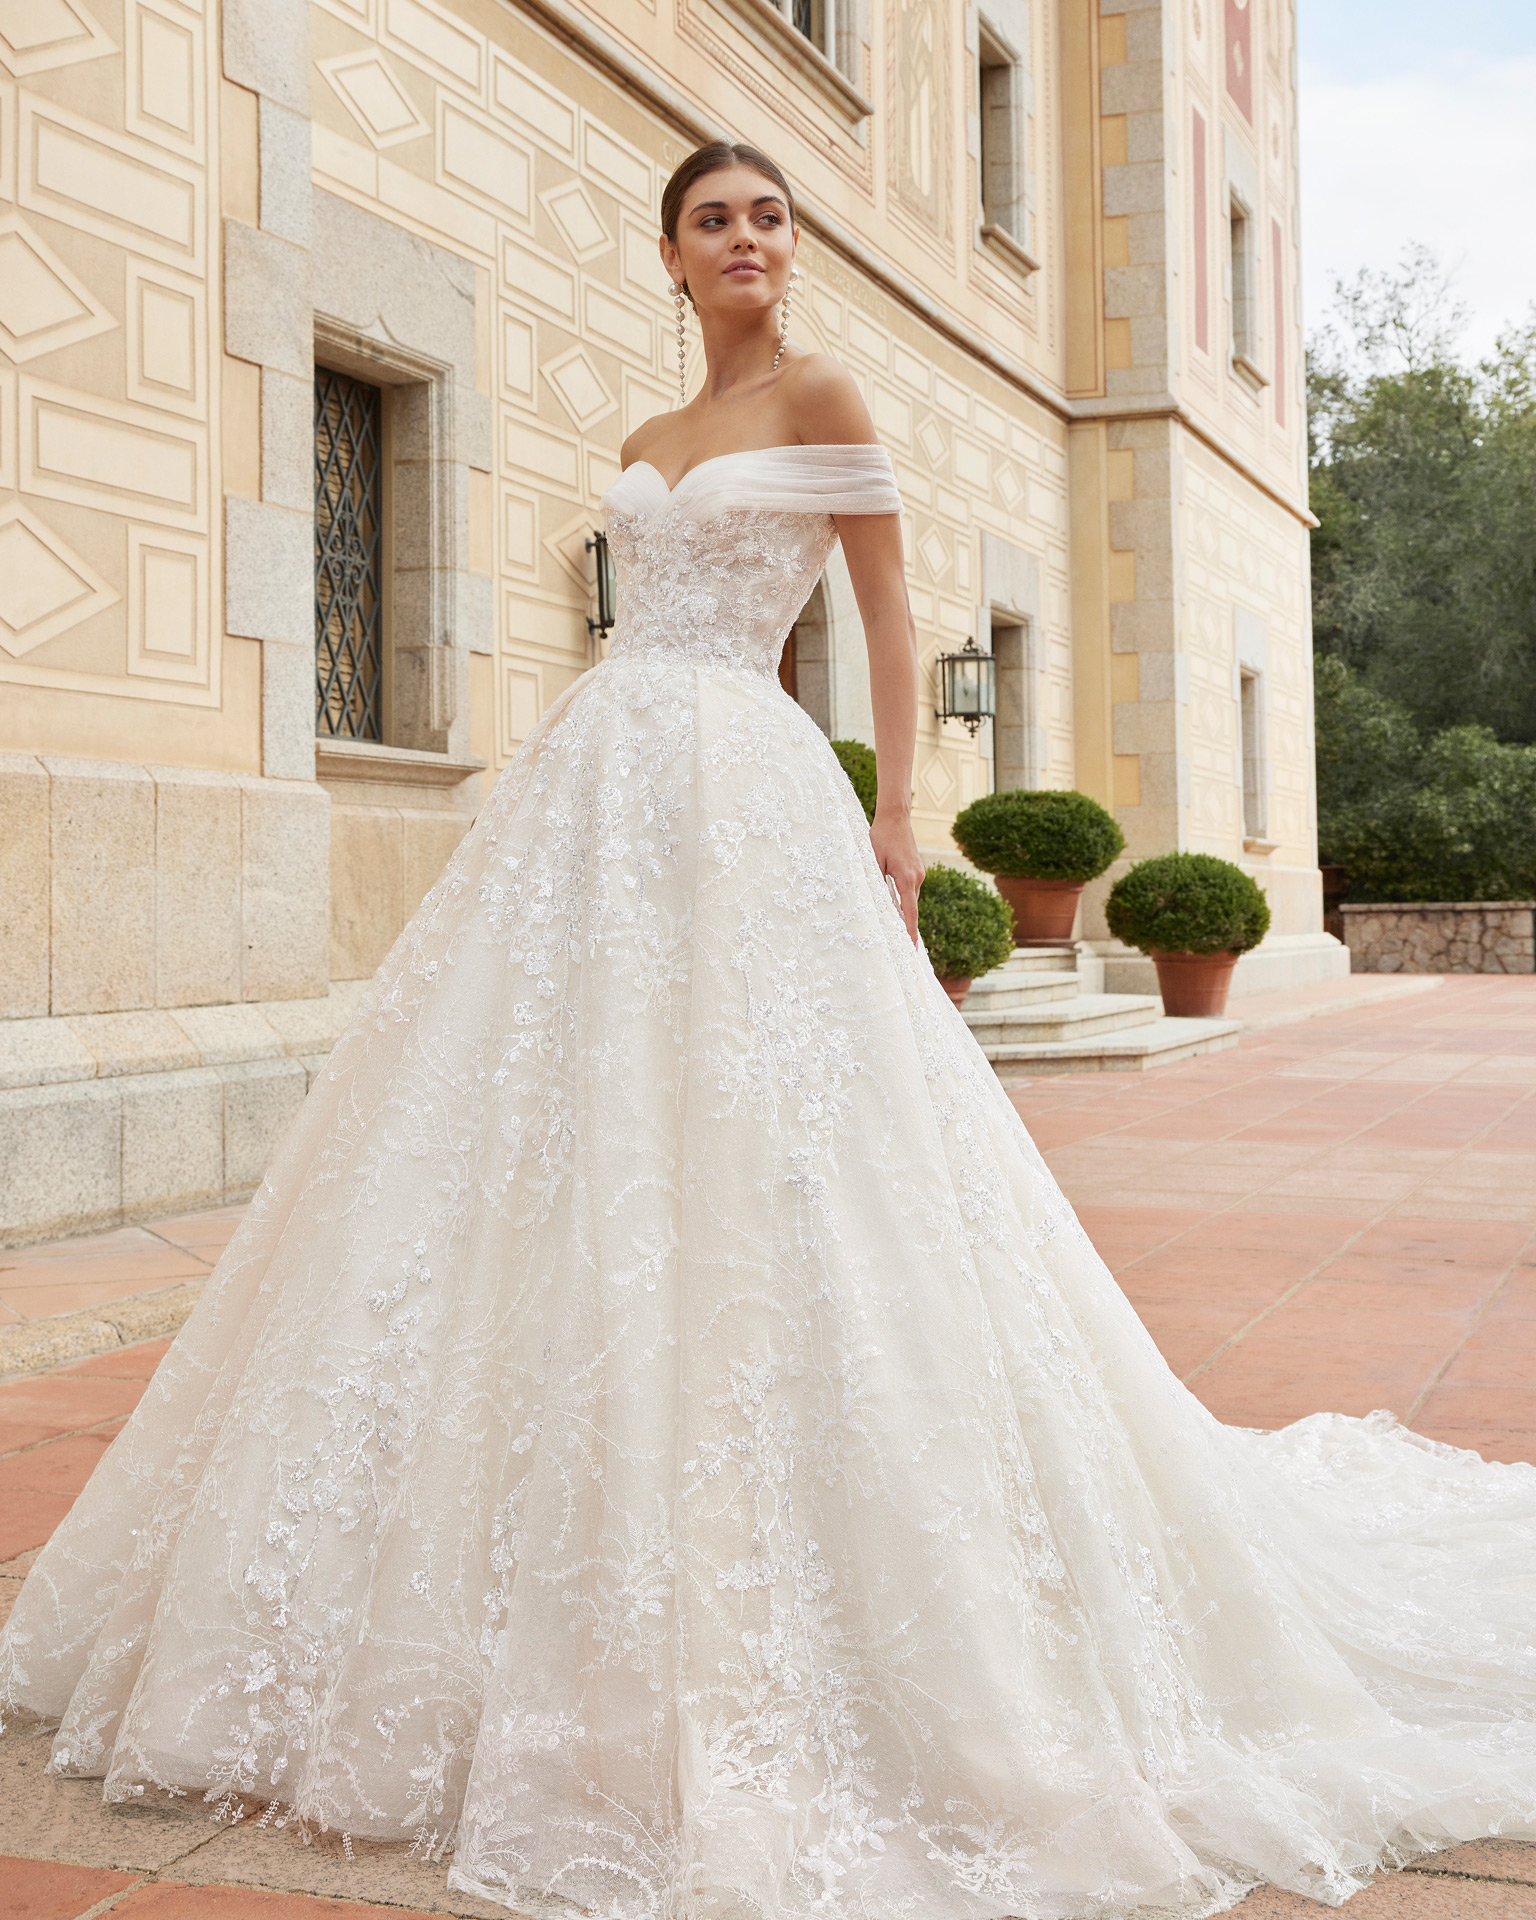 Romantic princess wedding dress. Crafted in lace and beadwork, it features a cuff neckline and buttoned back for a simply ideal look. Dreamy Luna Studio design. LUNA_NOVIAS.